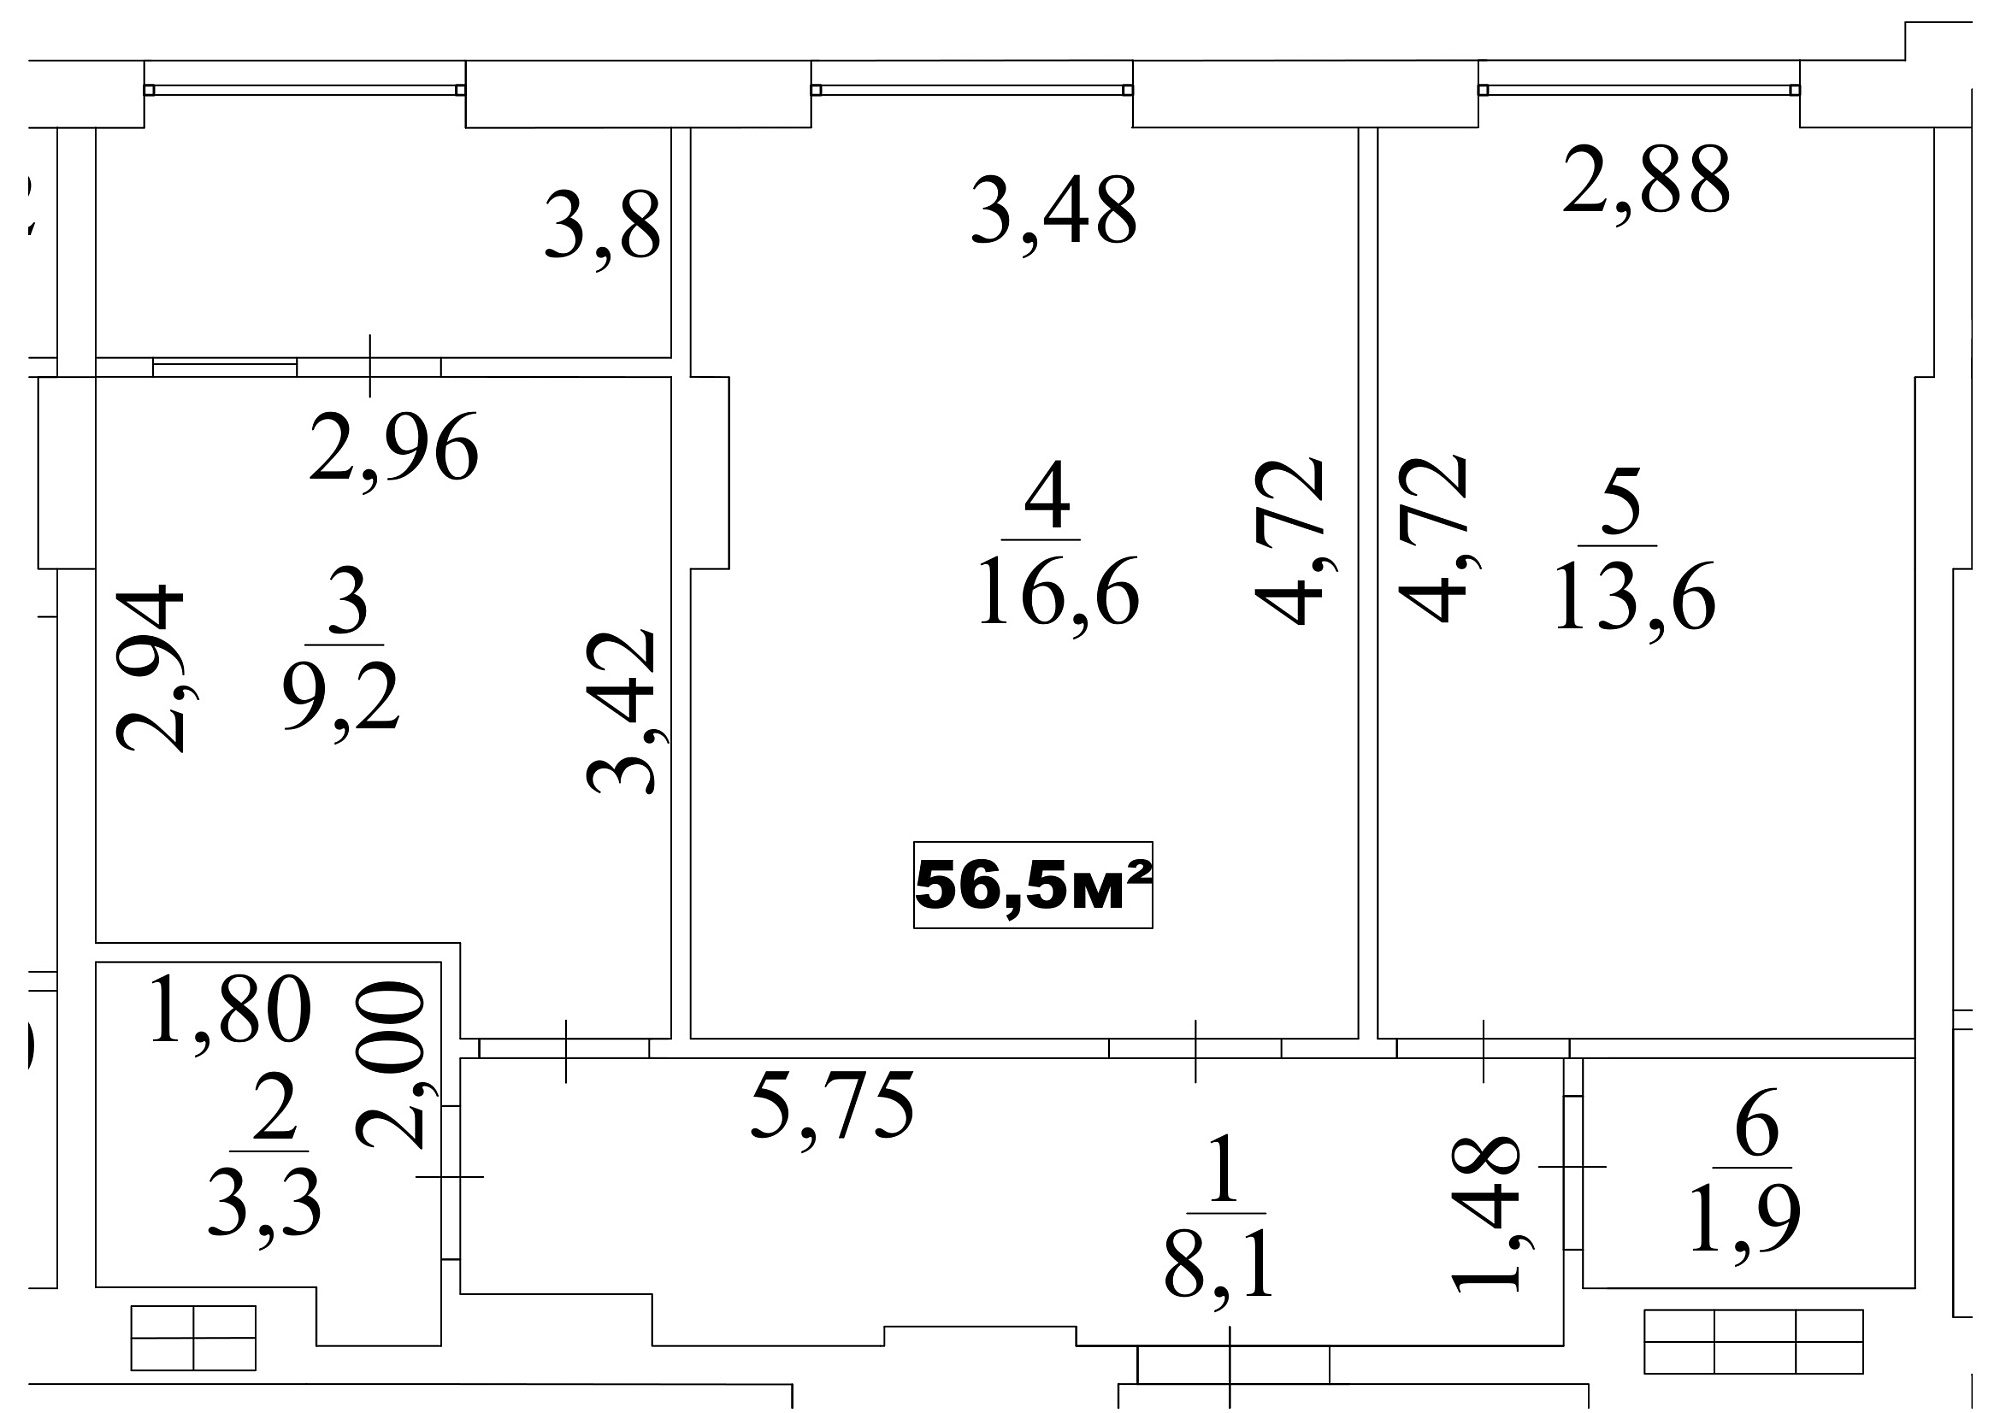 Planning 2-rm flats area 56.5m2, AB-10-01/00004.